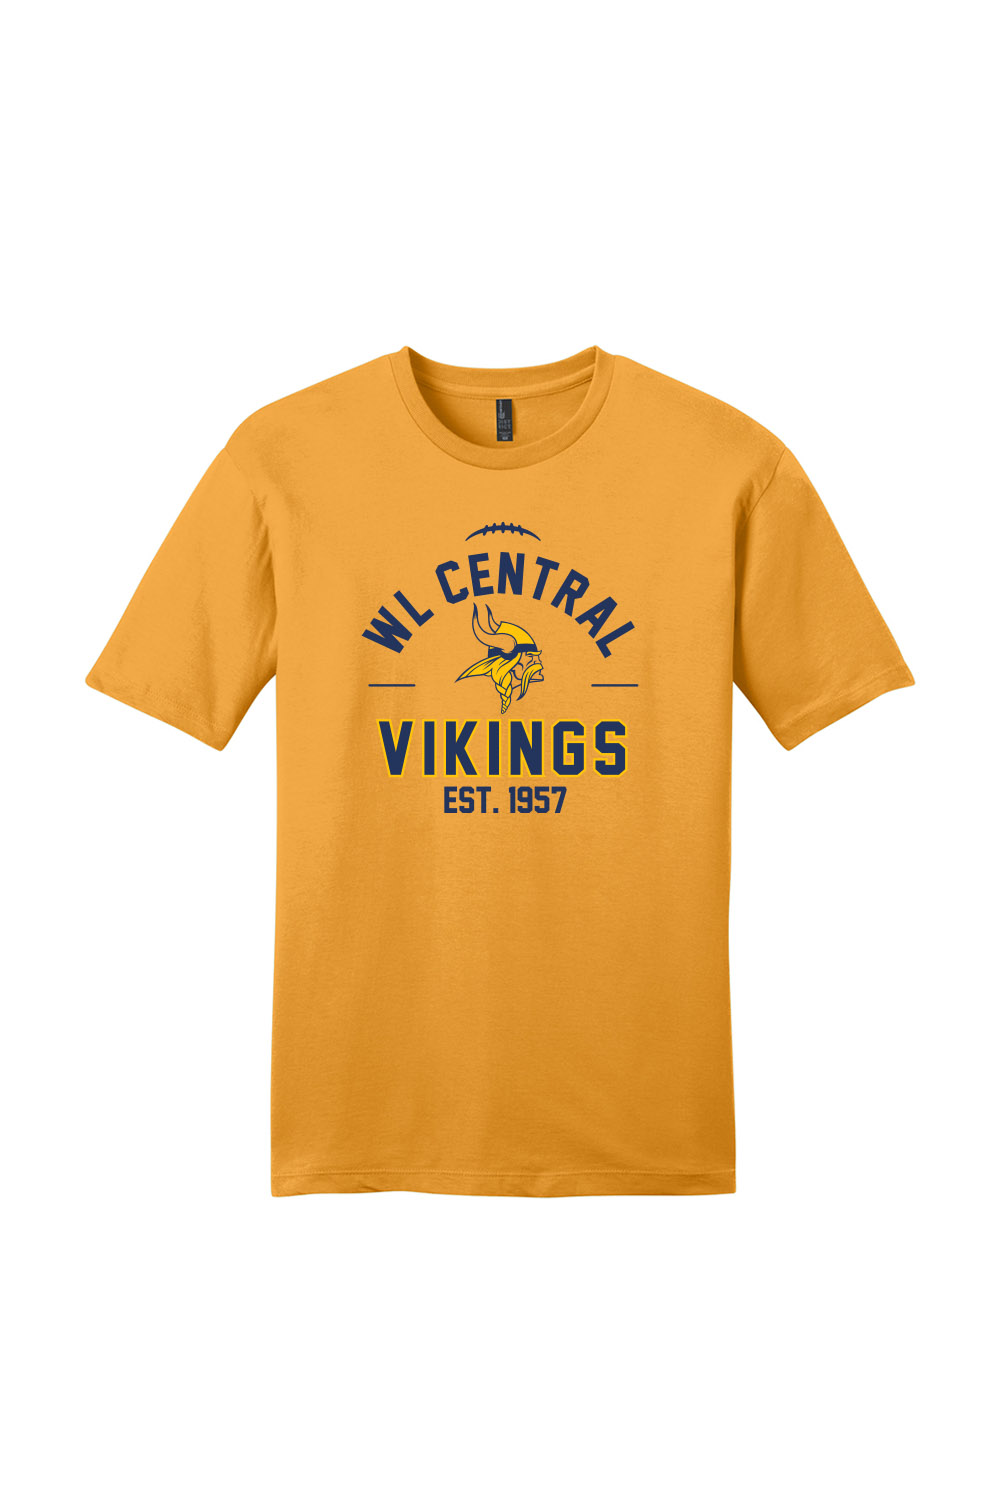 District ® Very Important Tee ® | Walled Lake Central Gear